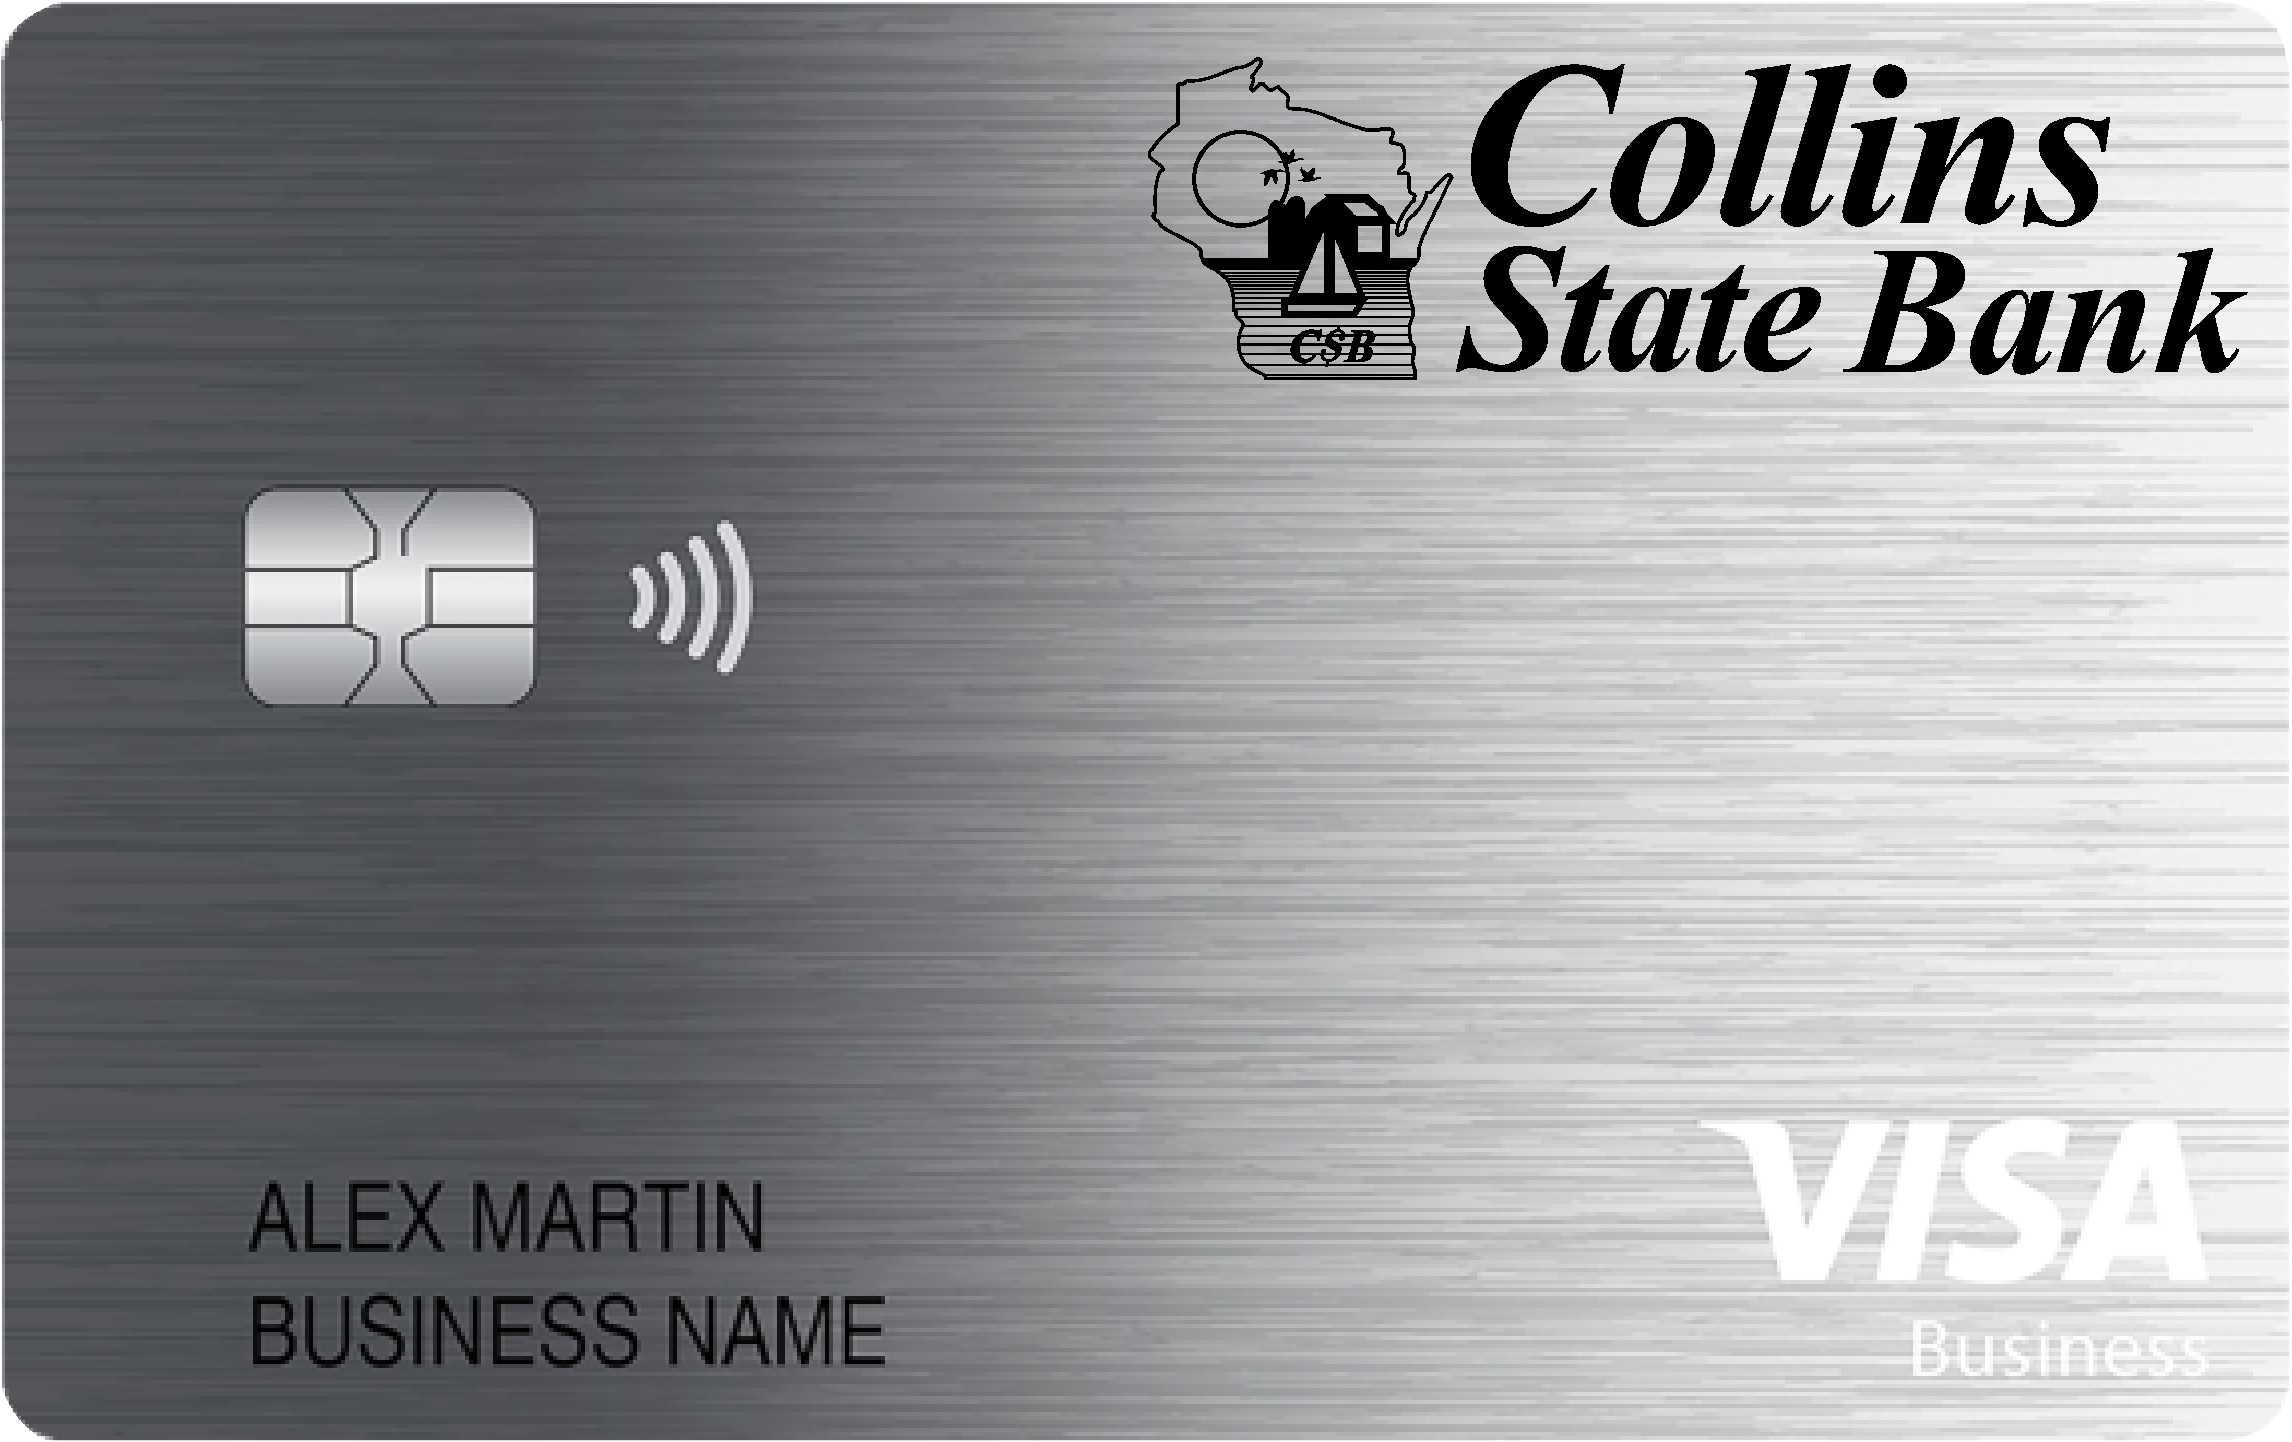 Collins State Bank Business Real Rewards Card